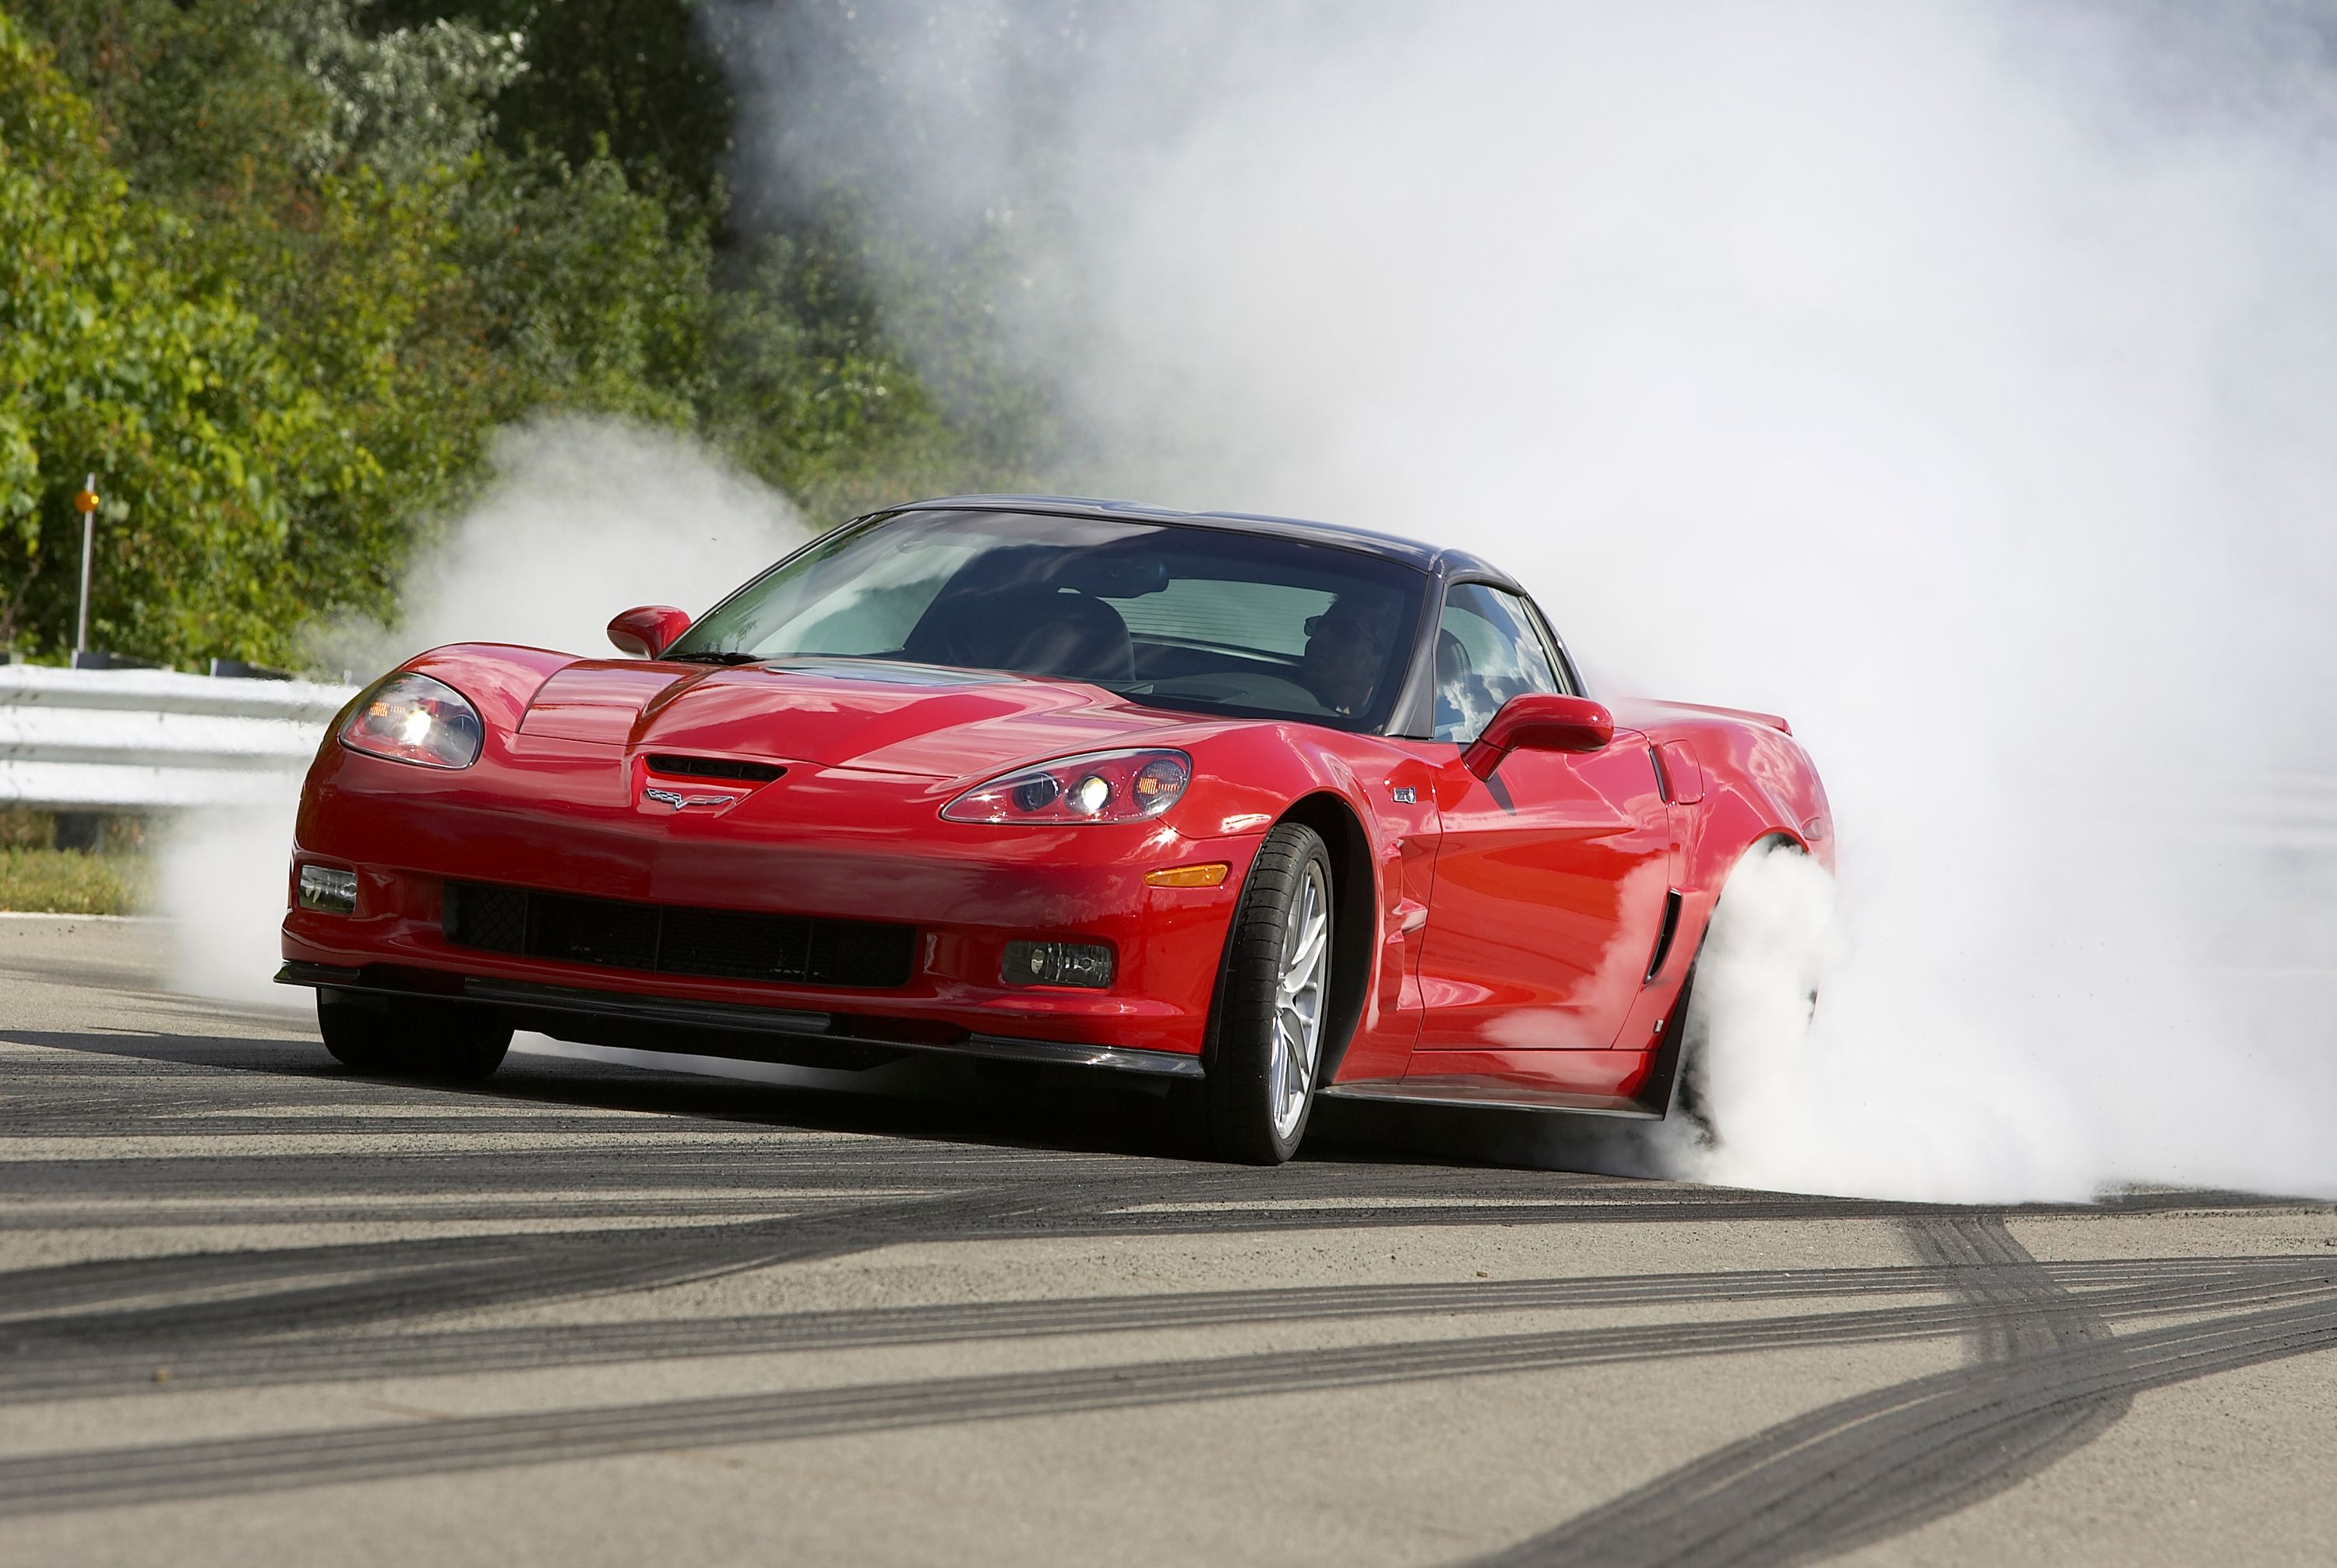 A red ZR1 doing a burnout.